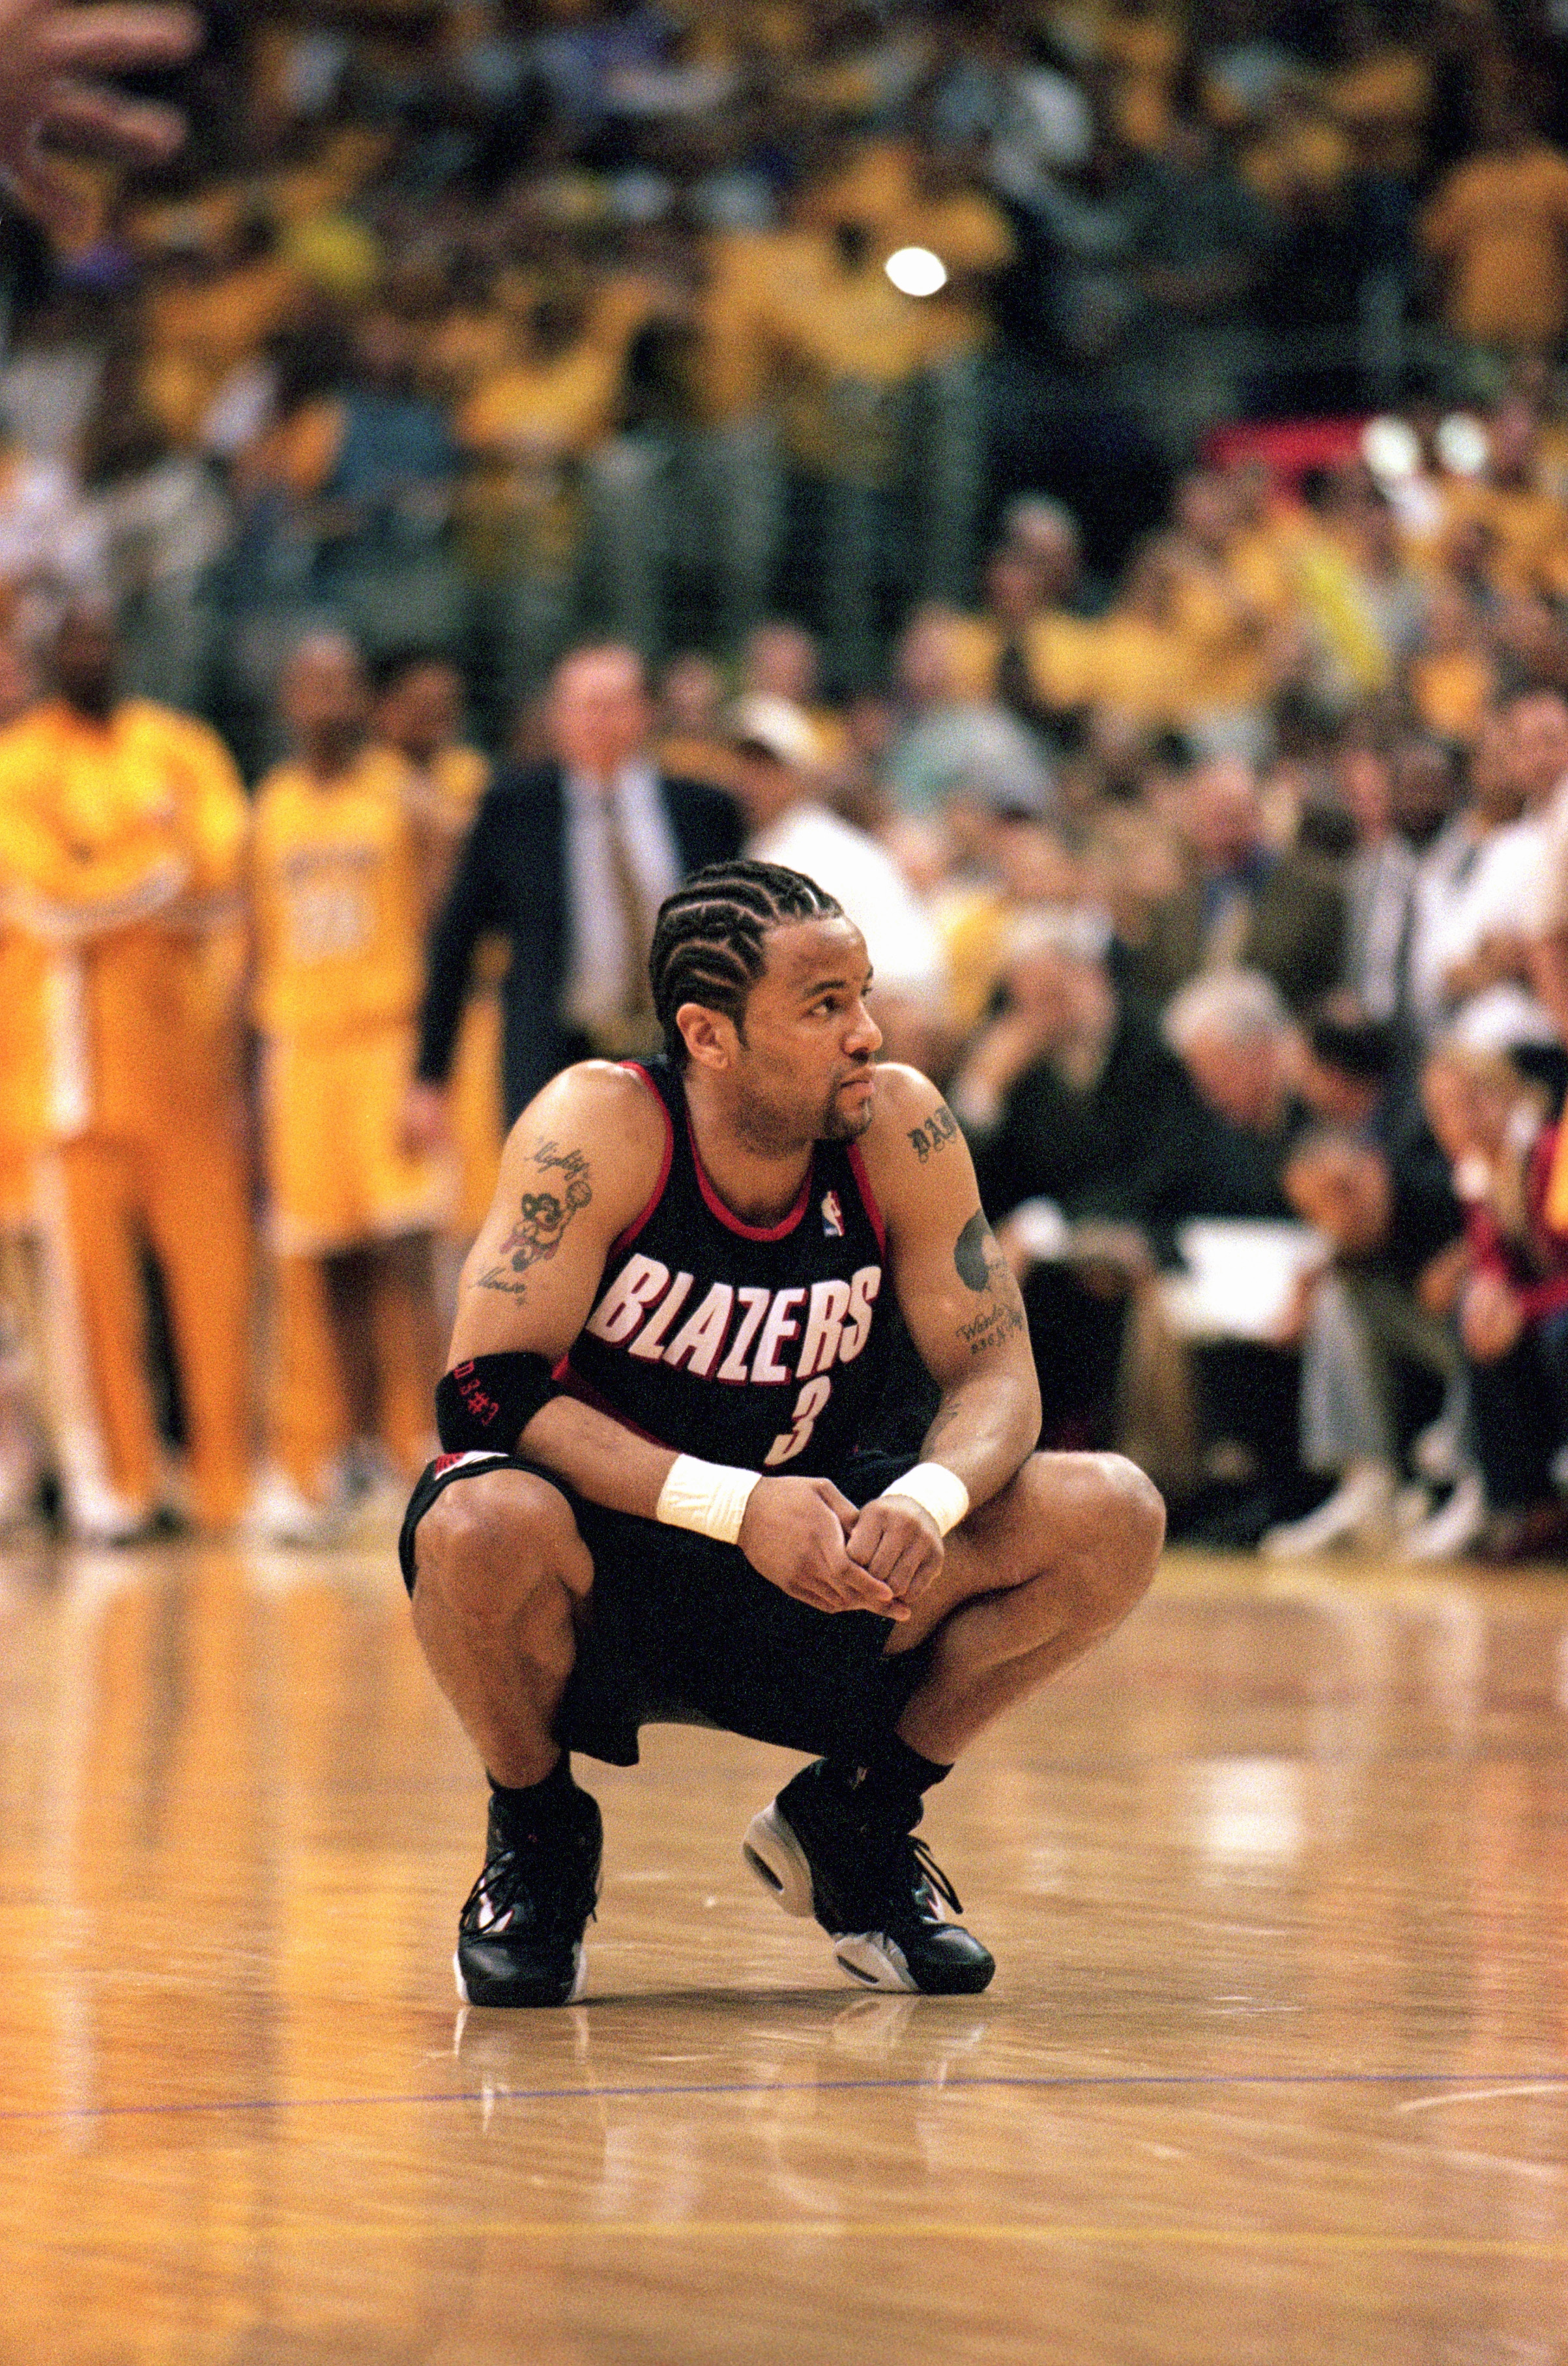 Remembering the 2000 NBA Finals Photo Gallery